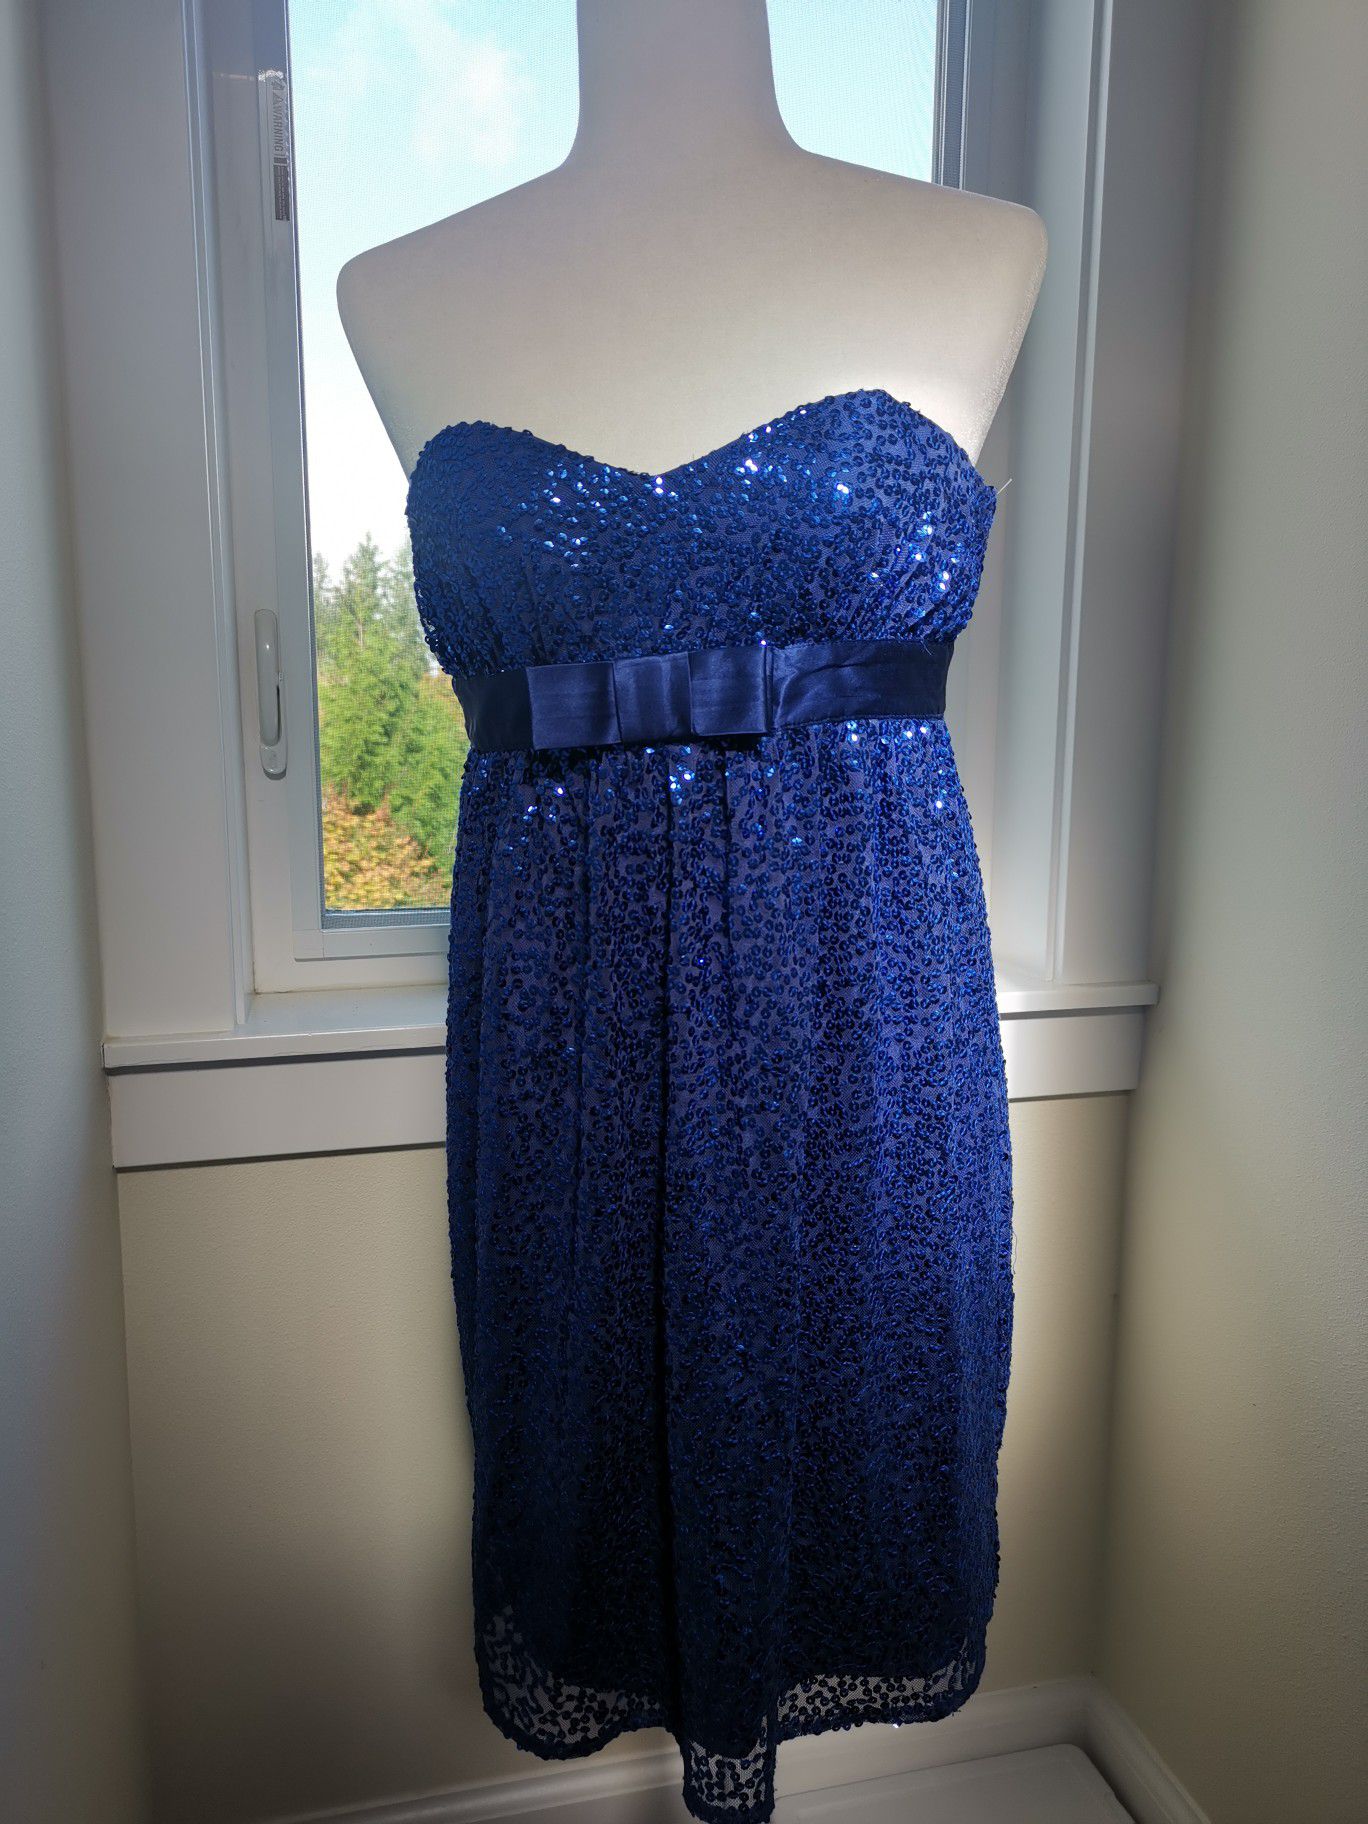 Betsy Johnson incredible blue sleeveless dress with sequins